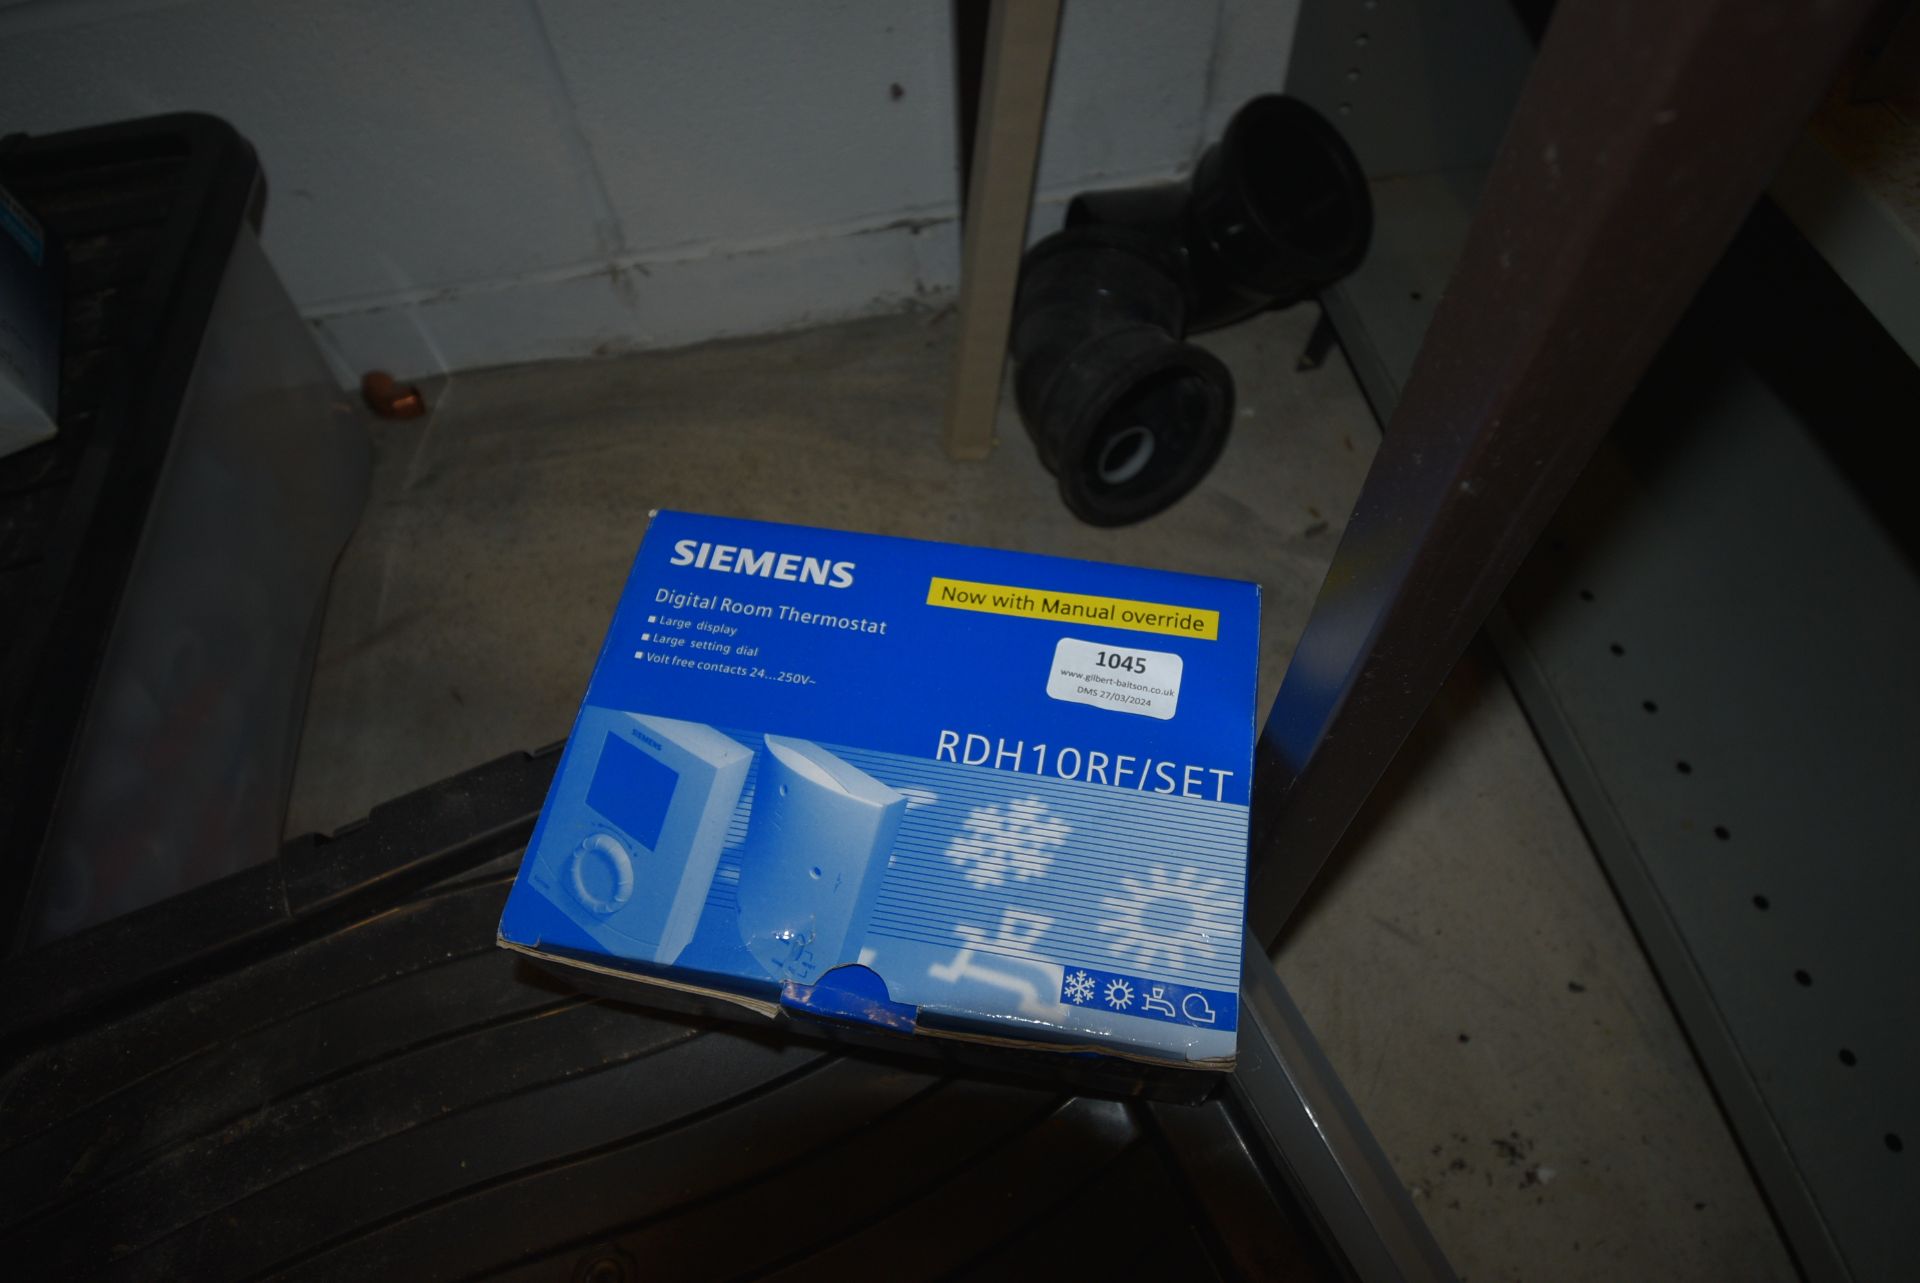 *Siemens RDH10RF Thermostat (Location: 64 King Edward St, Grimsby, DN31 3JP, Viewing Tuesday 26th,